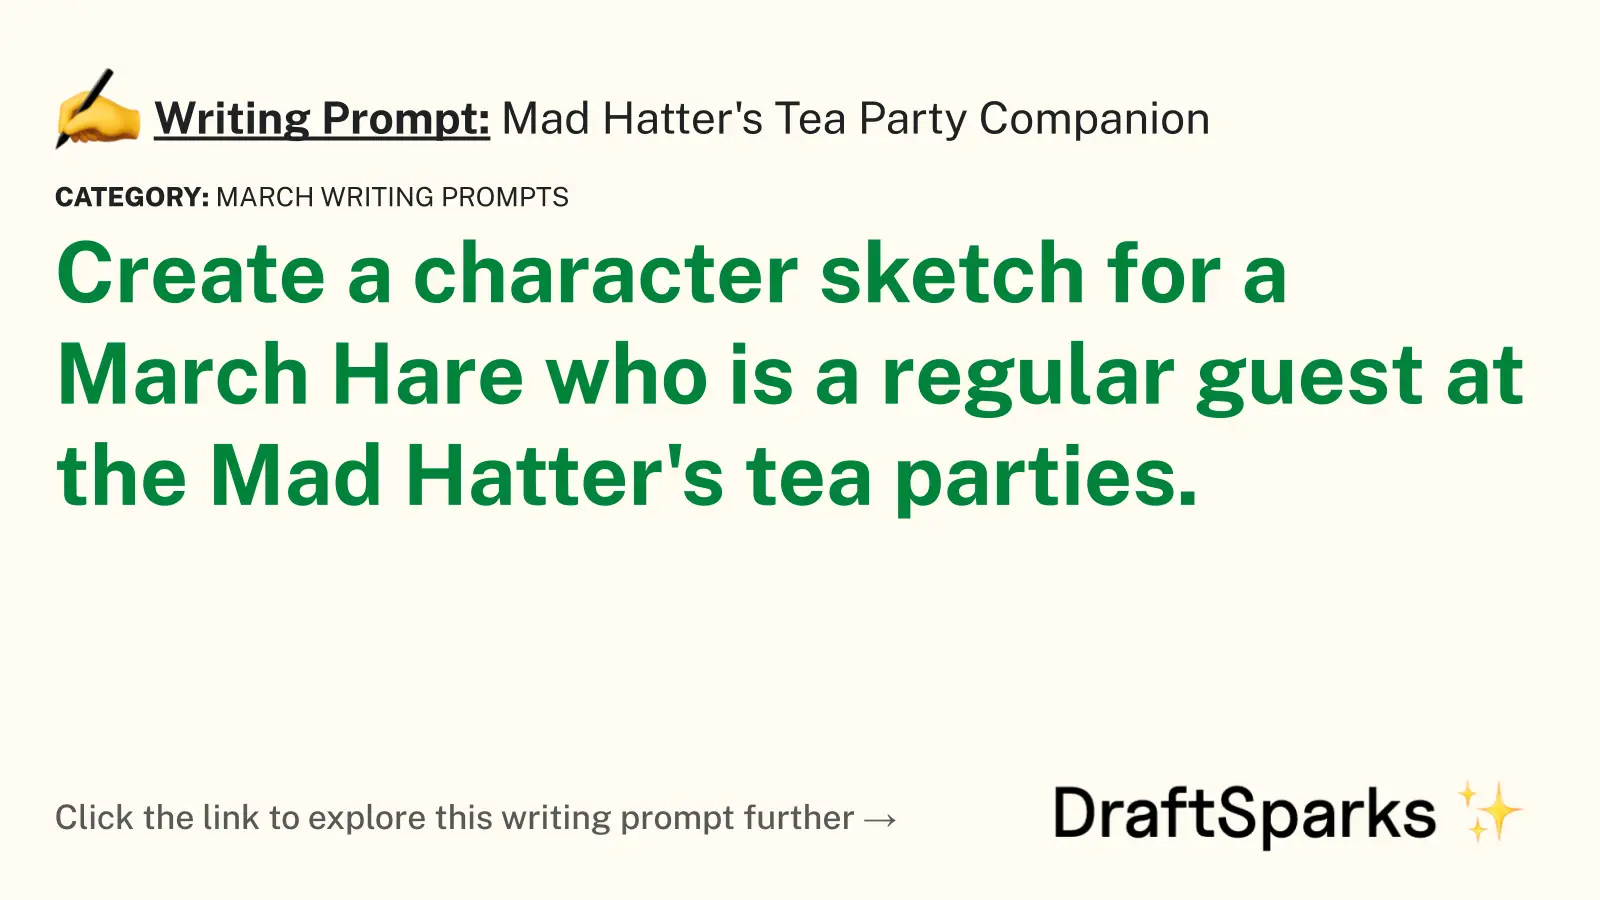 Mad Hatter’s Tea Party Companion